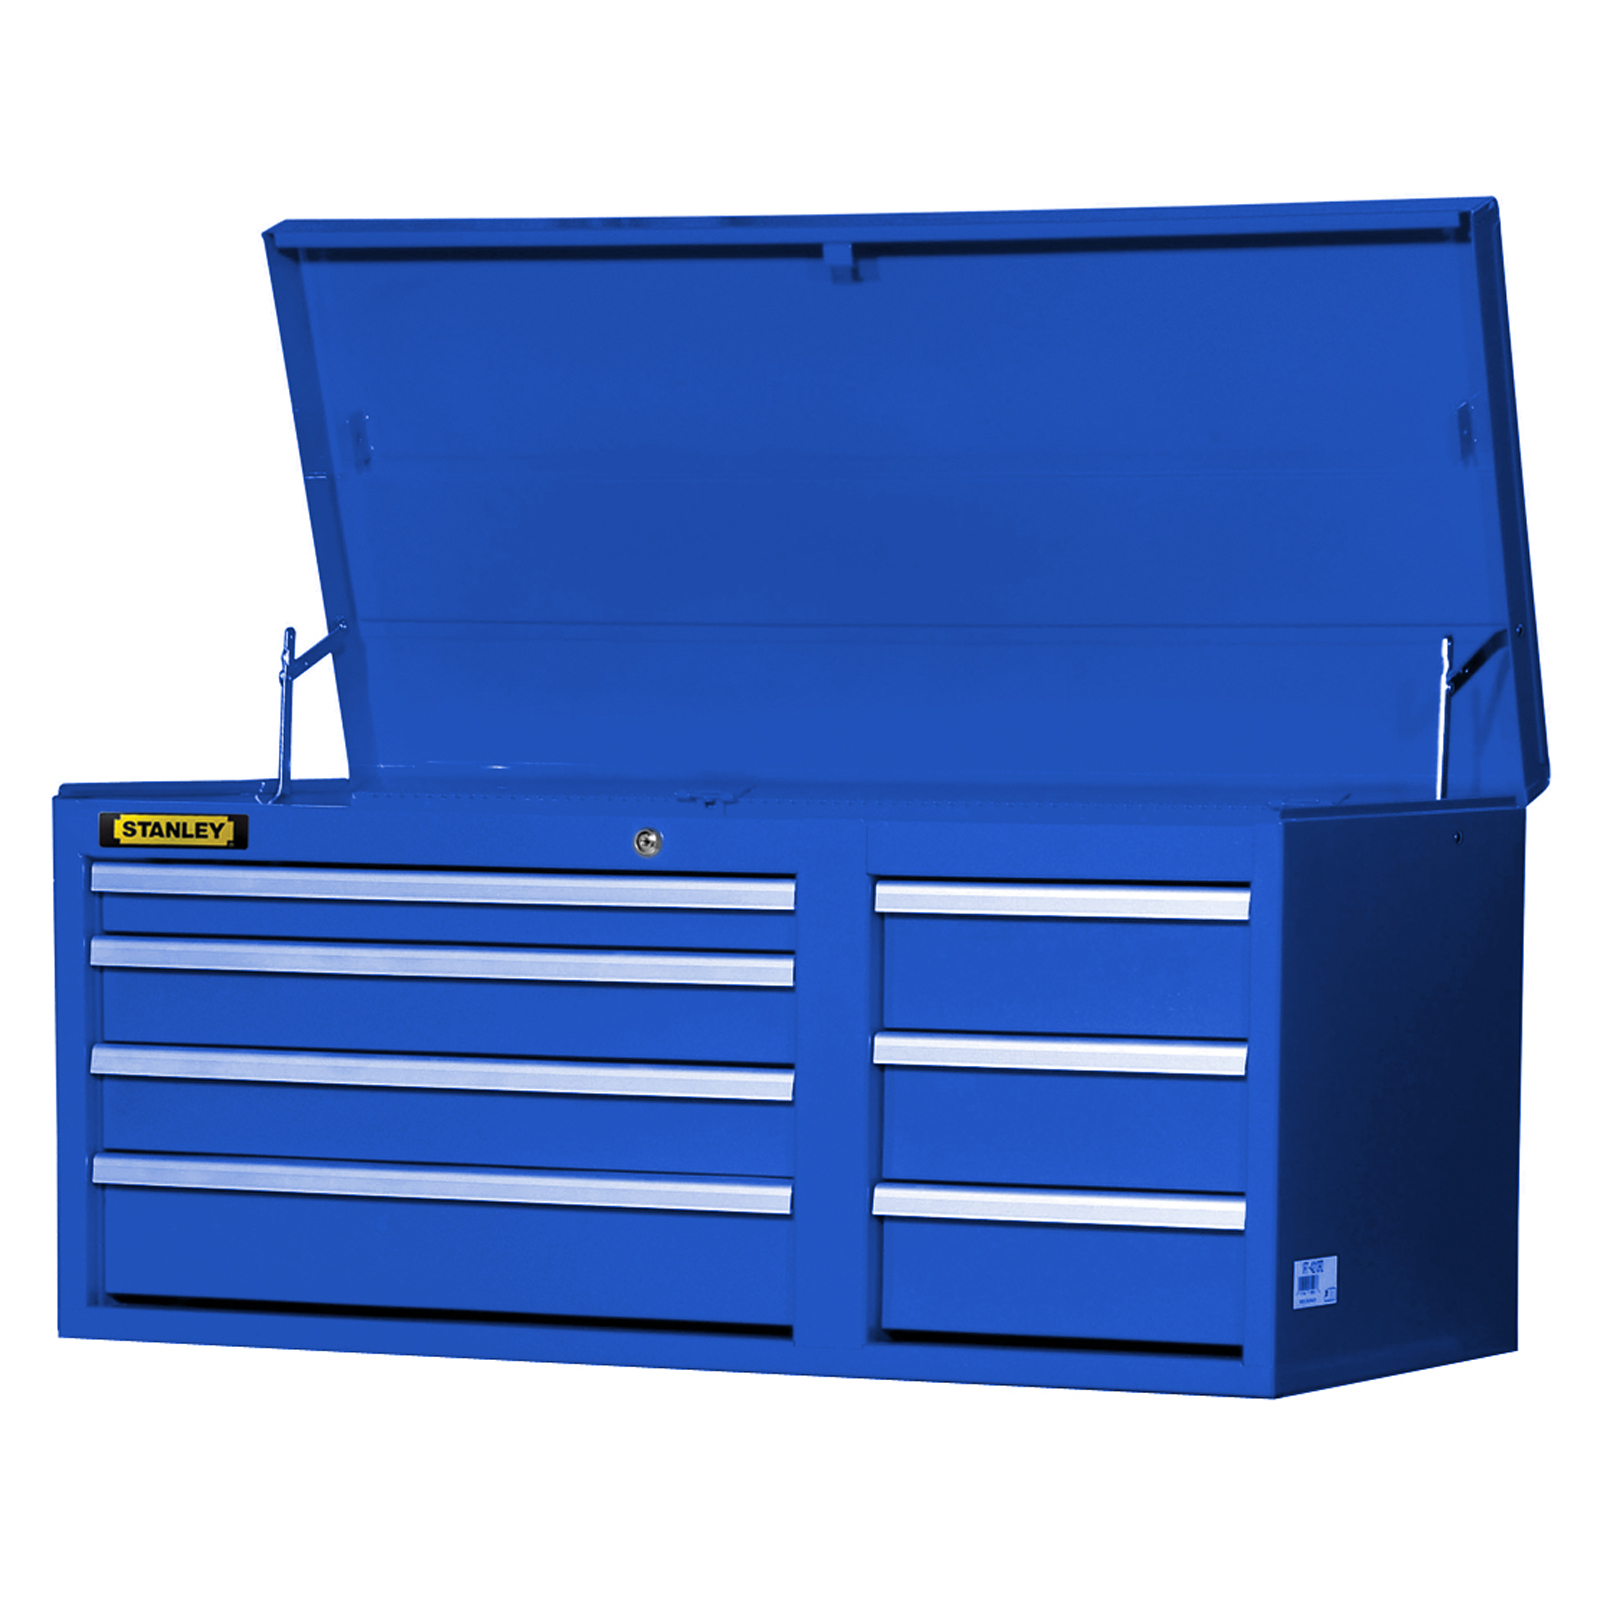 Stanley 42" 7-Drawer Ball Bearing Slides Top Chest, Blue, PLUS FREE SHIPPING